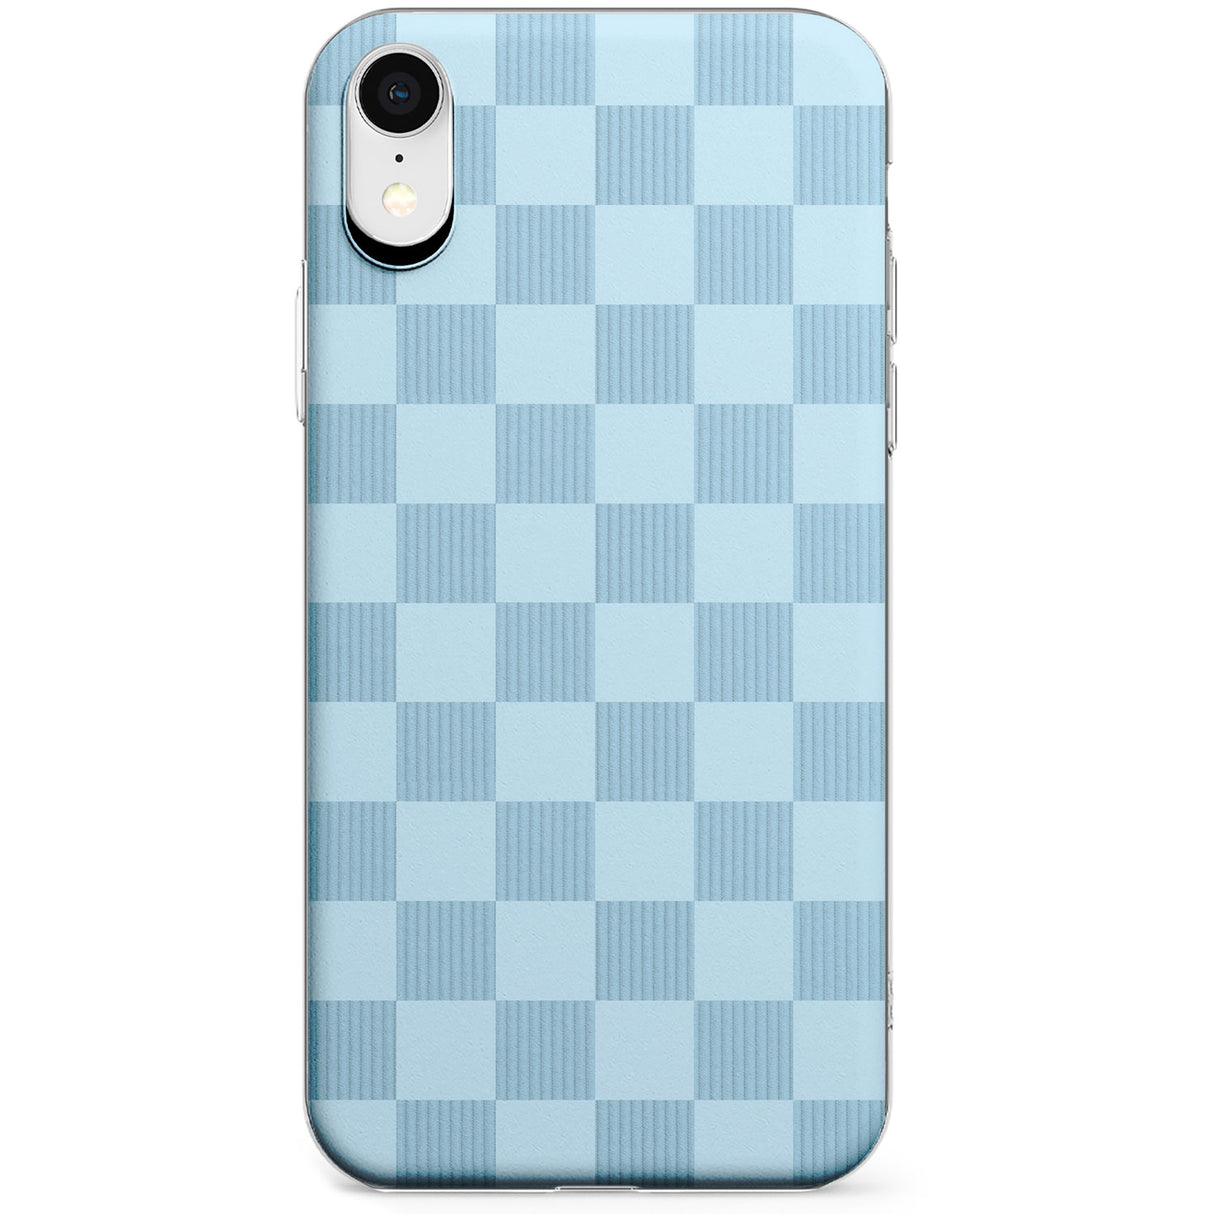 SKYBLUE CHECKERED Phone Case for iPhone X, XS Max, XR